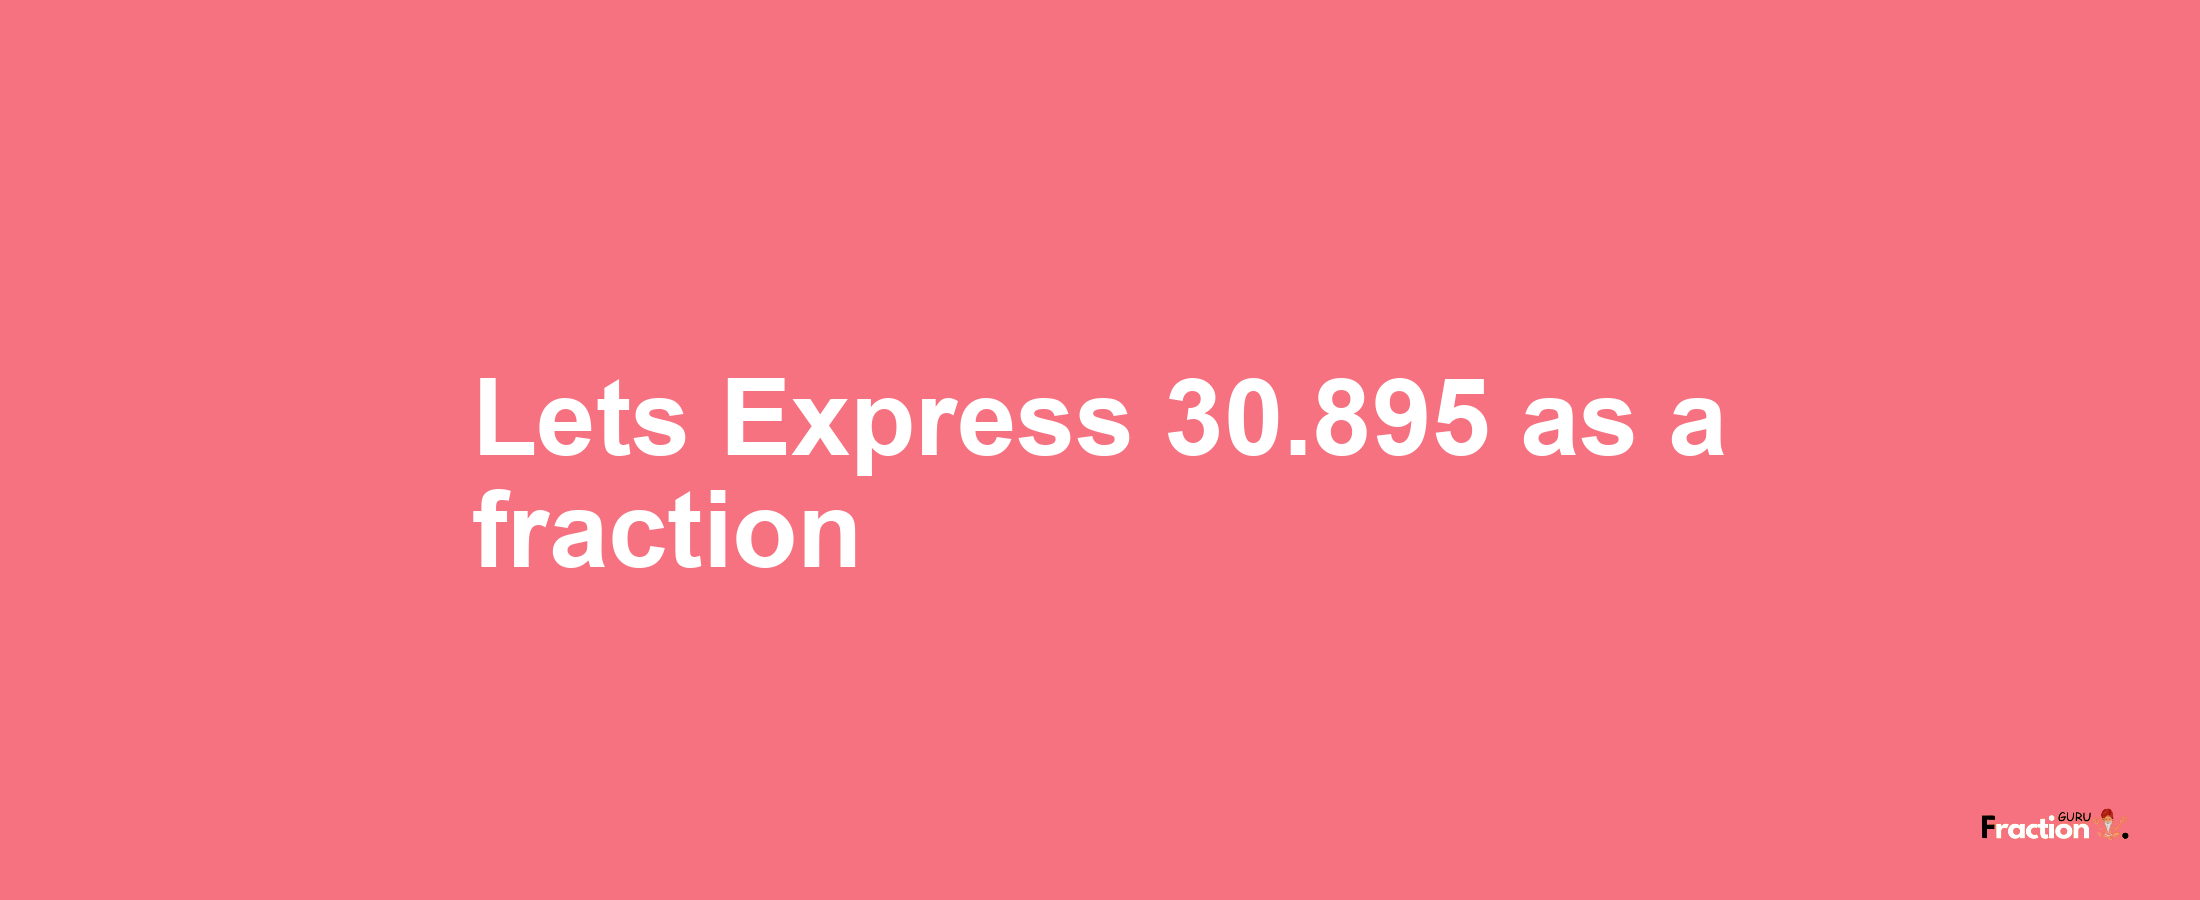 Lets Express 30.895 as afraction